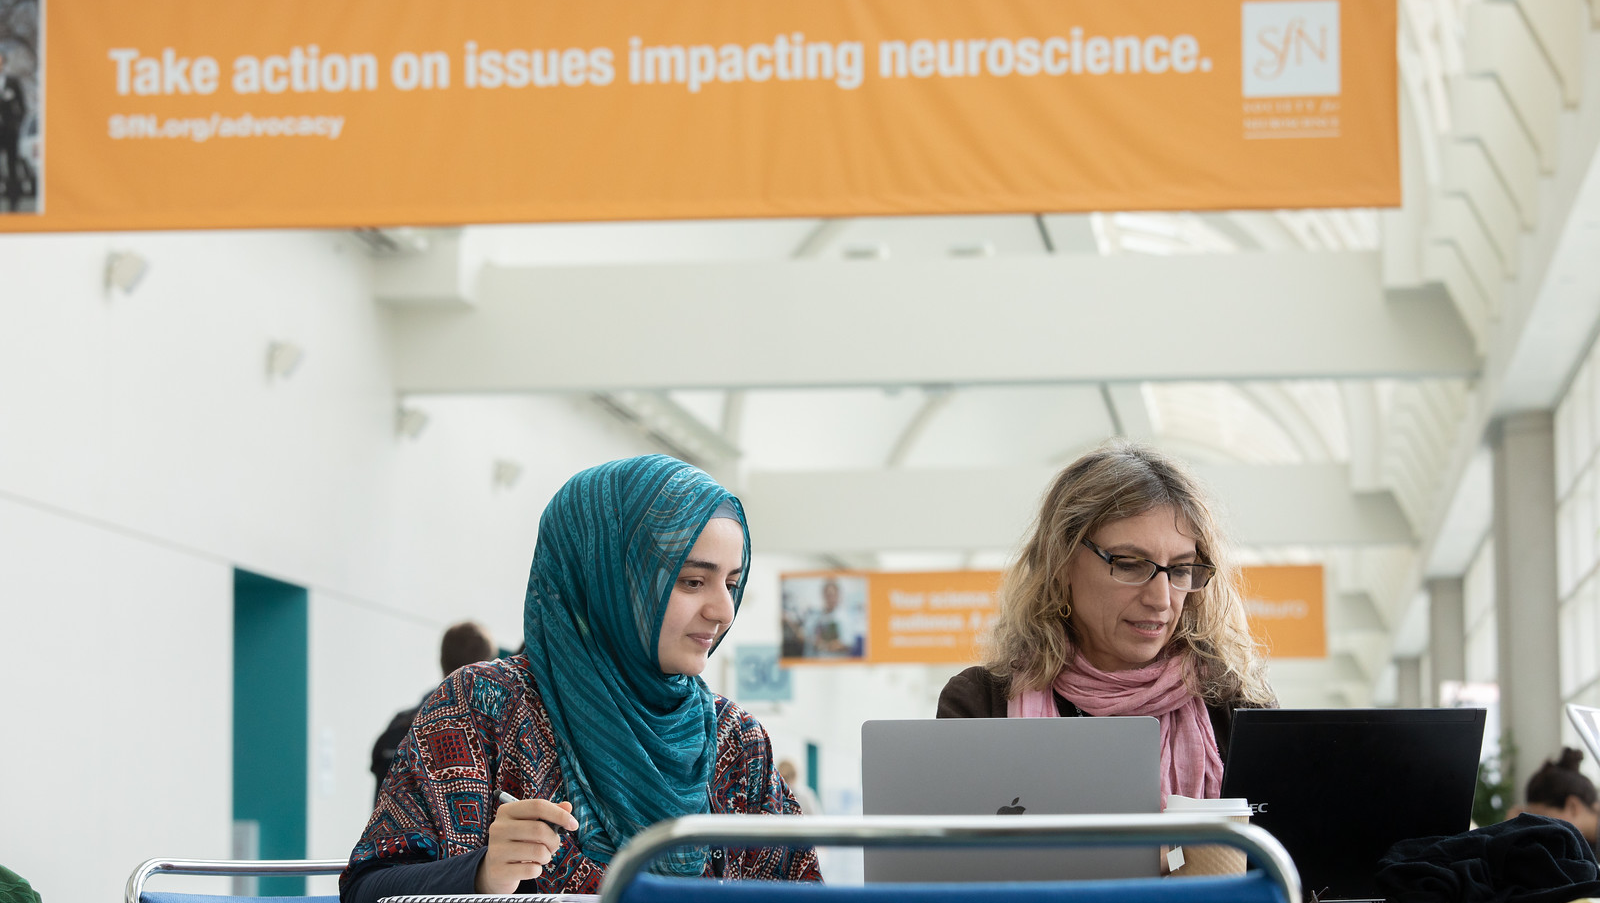 Attendees at Neuroscience 2018 catch up on work between sessions